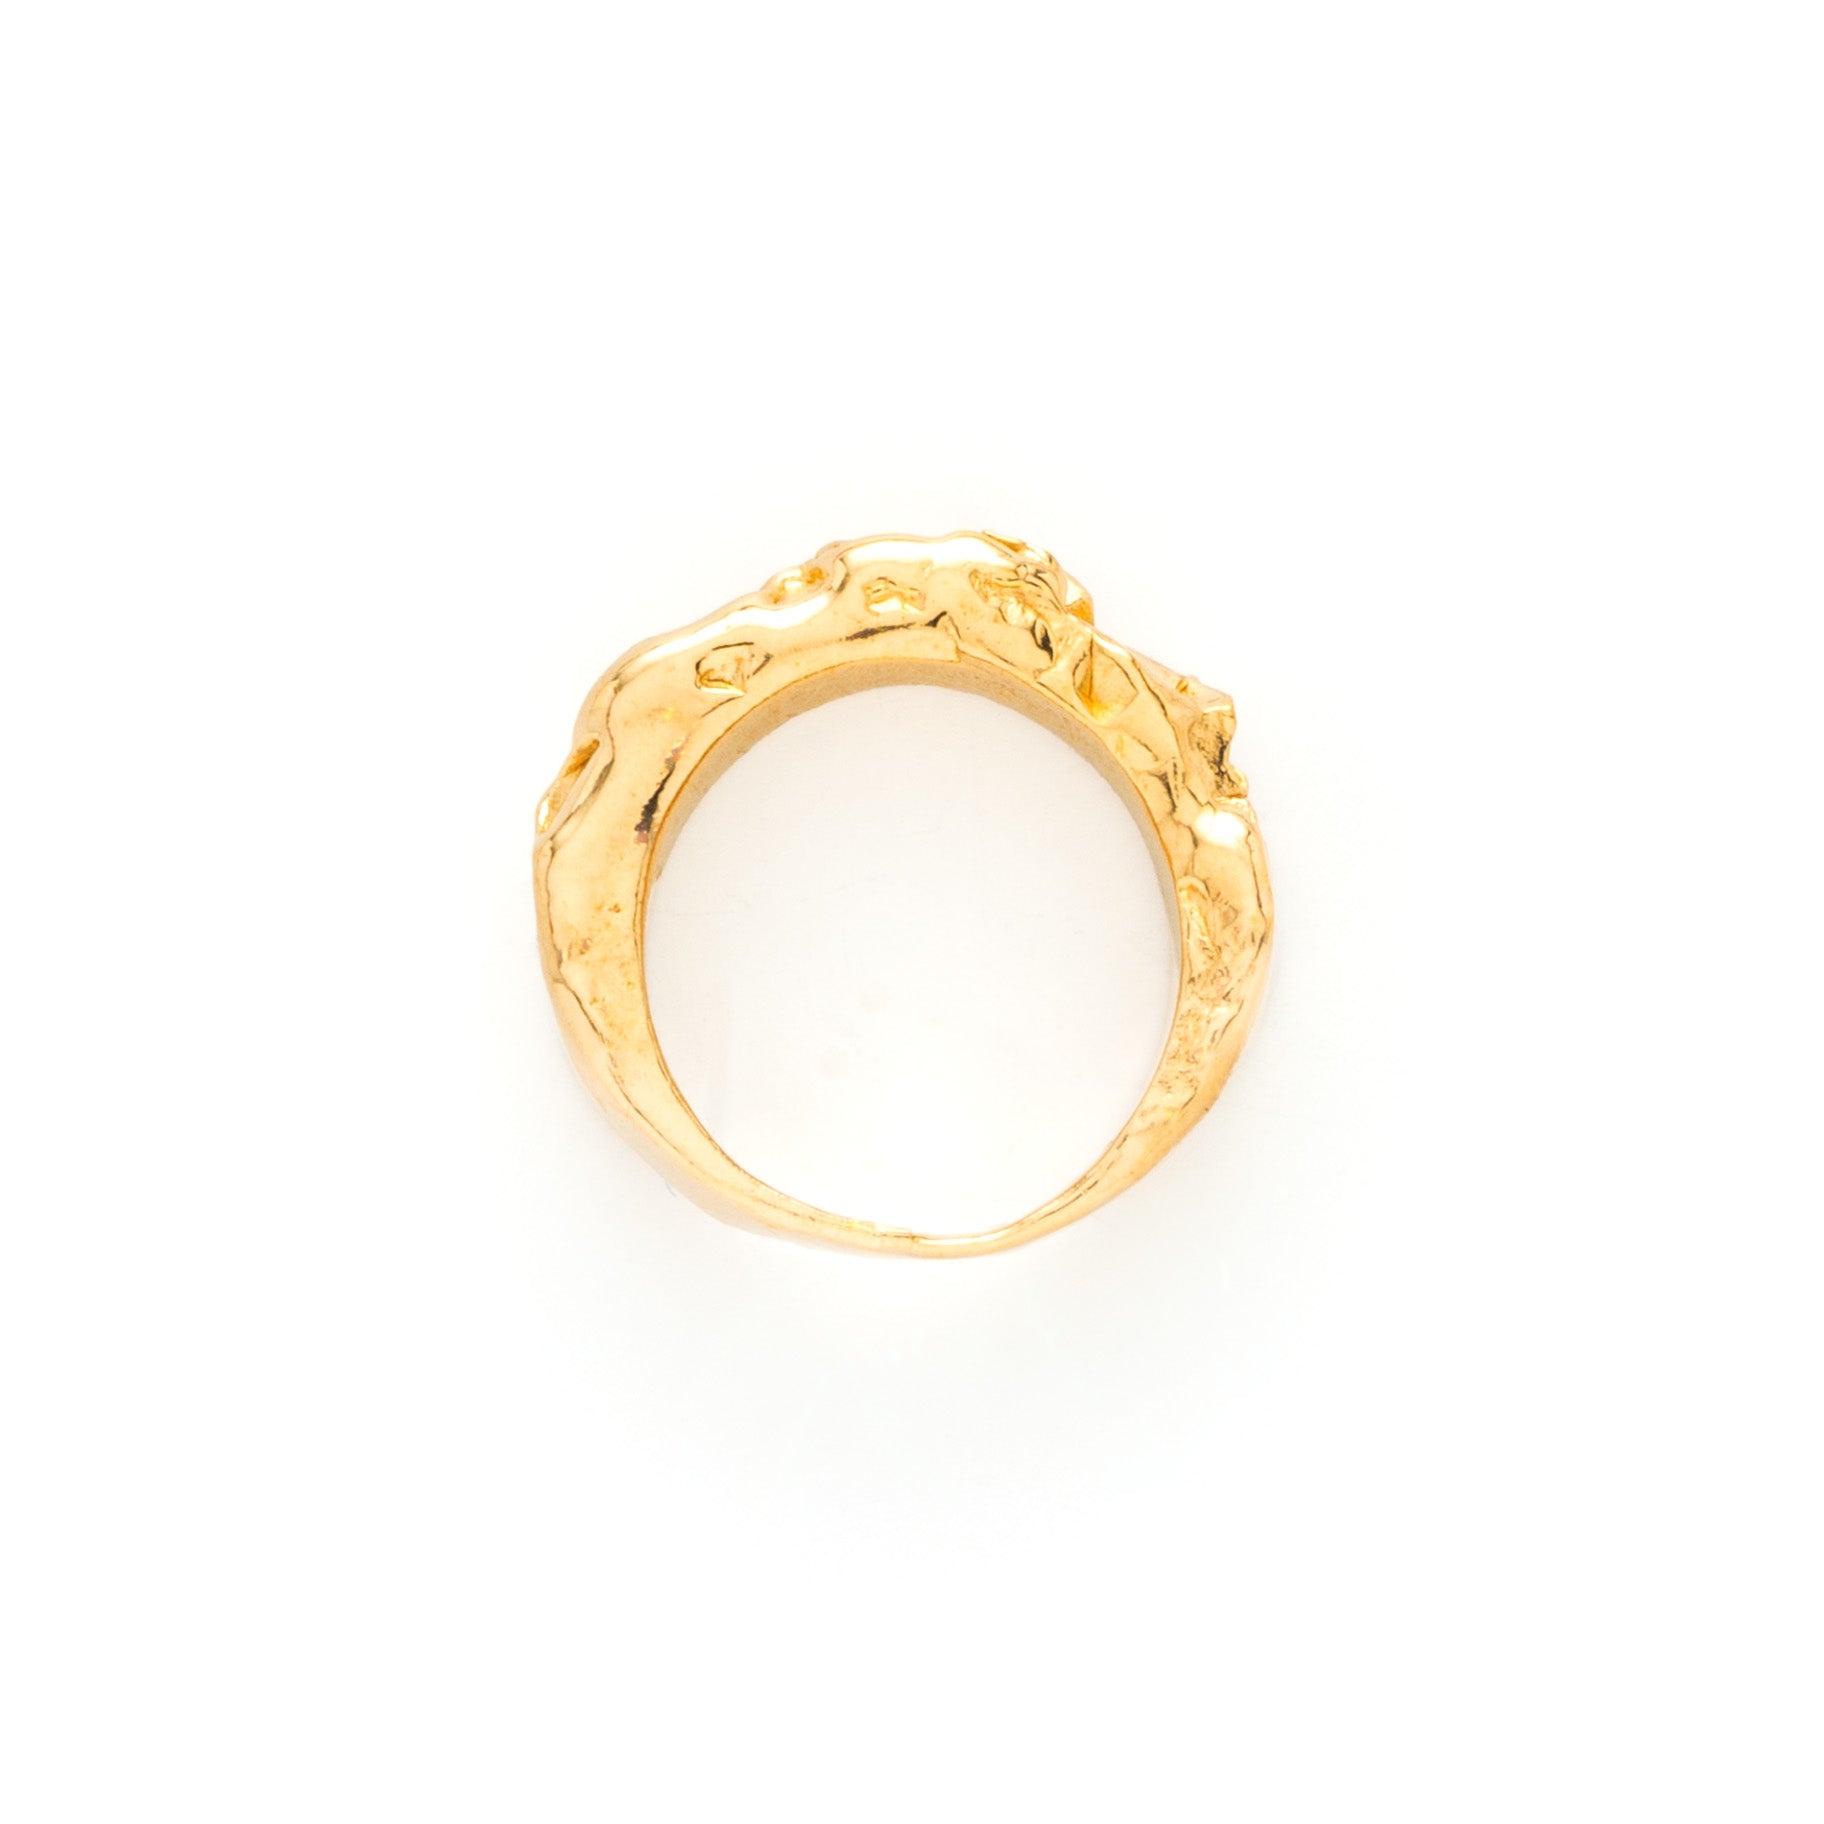 Olgivie Ring in Gold by What If You Stayed Jewelry textured Ring Organic Style 